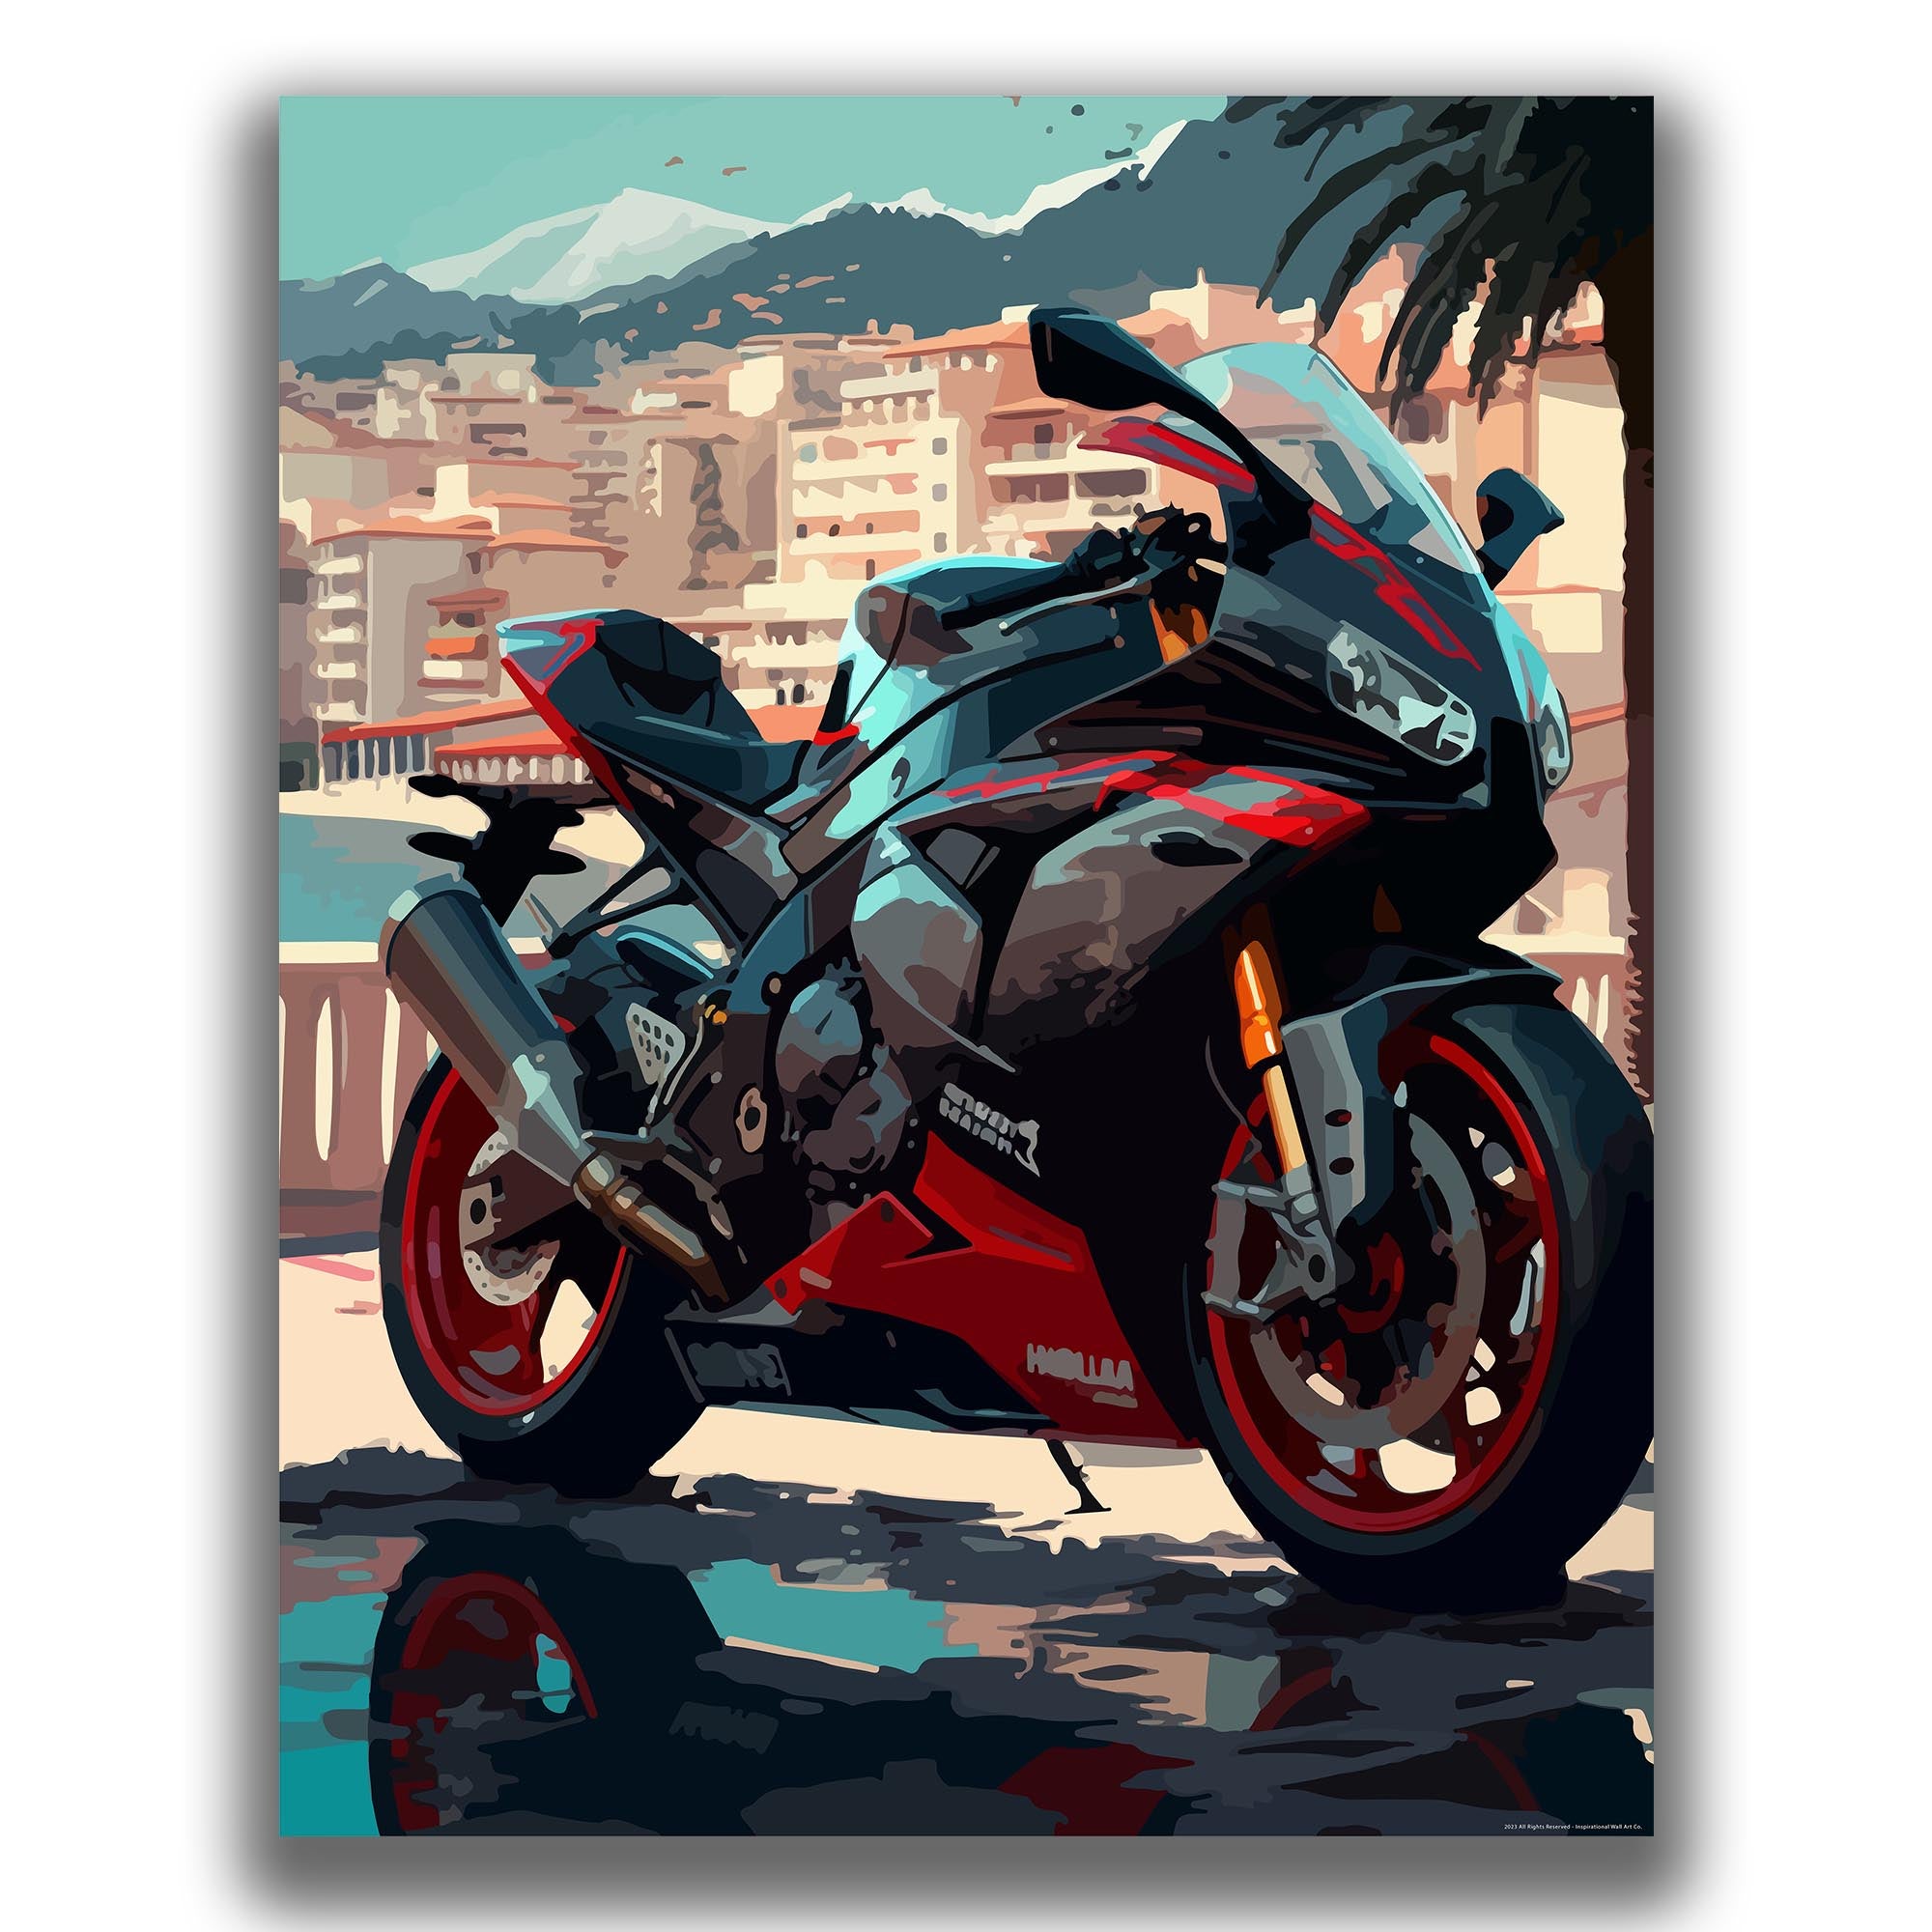 Mighty - Motorcycle Poster